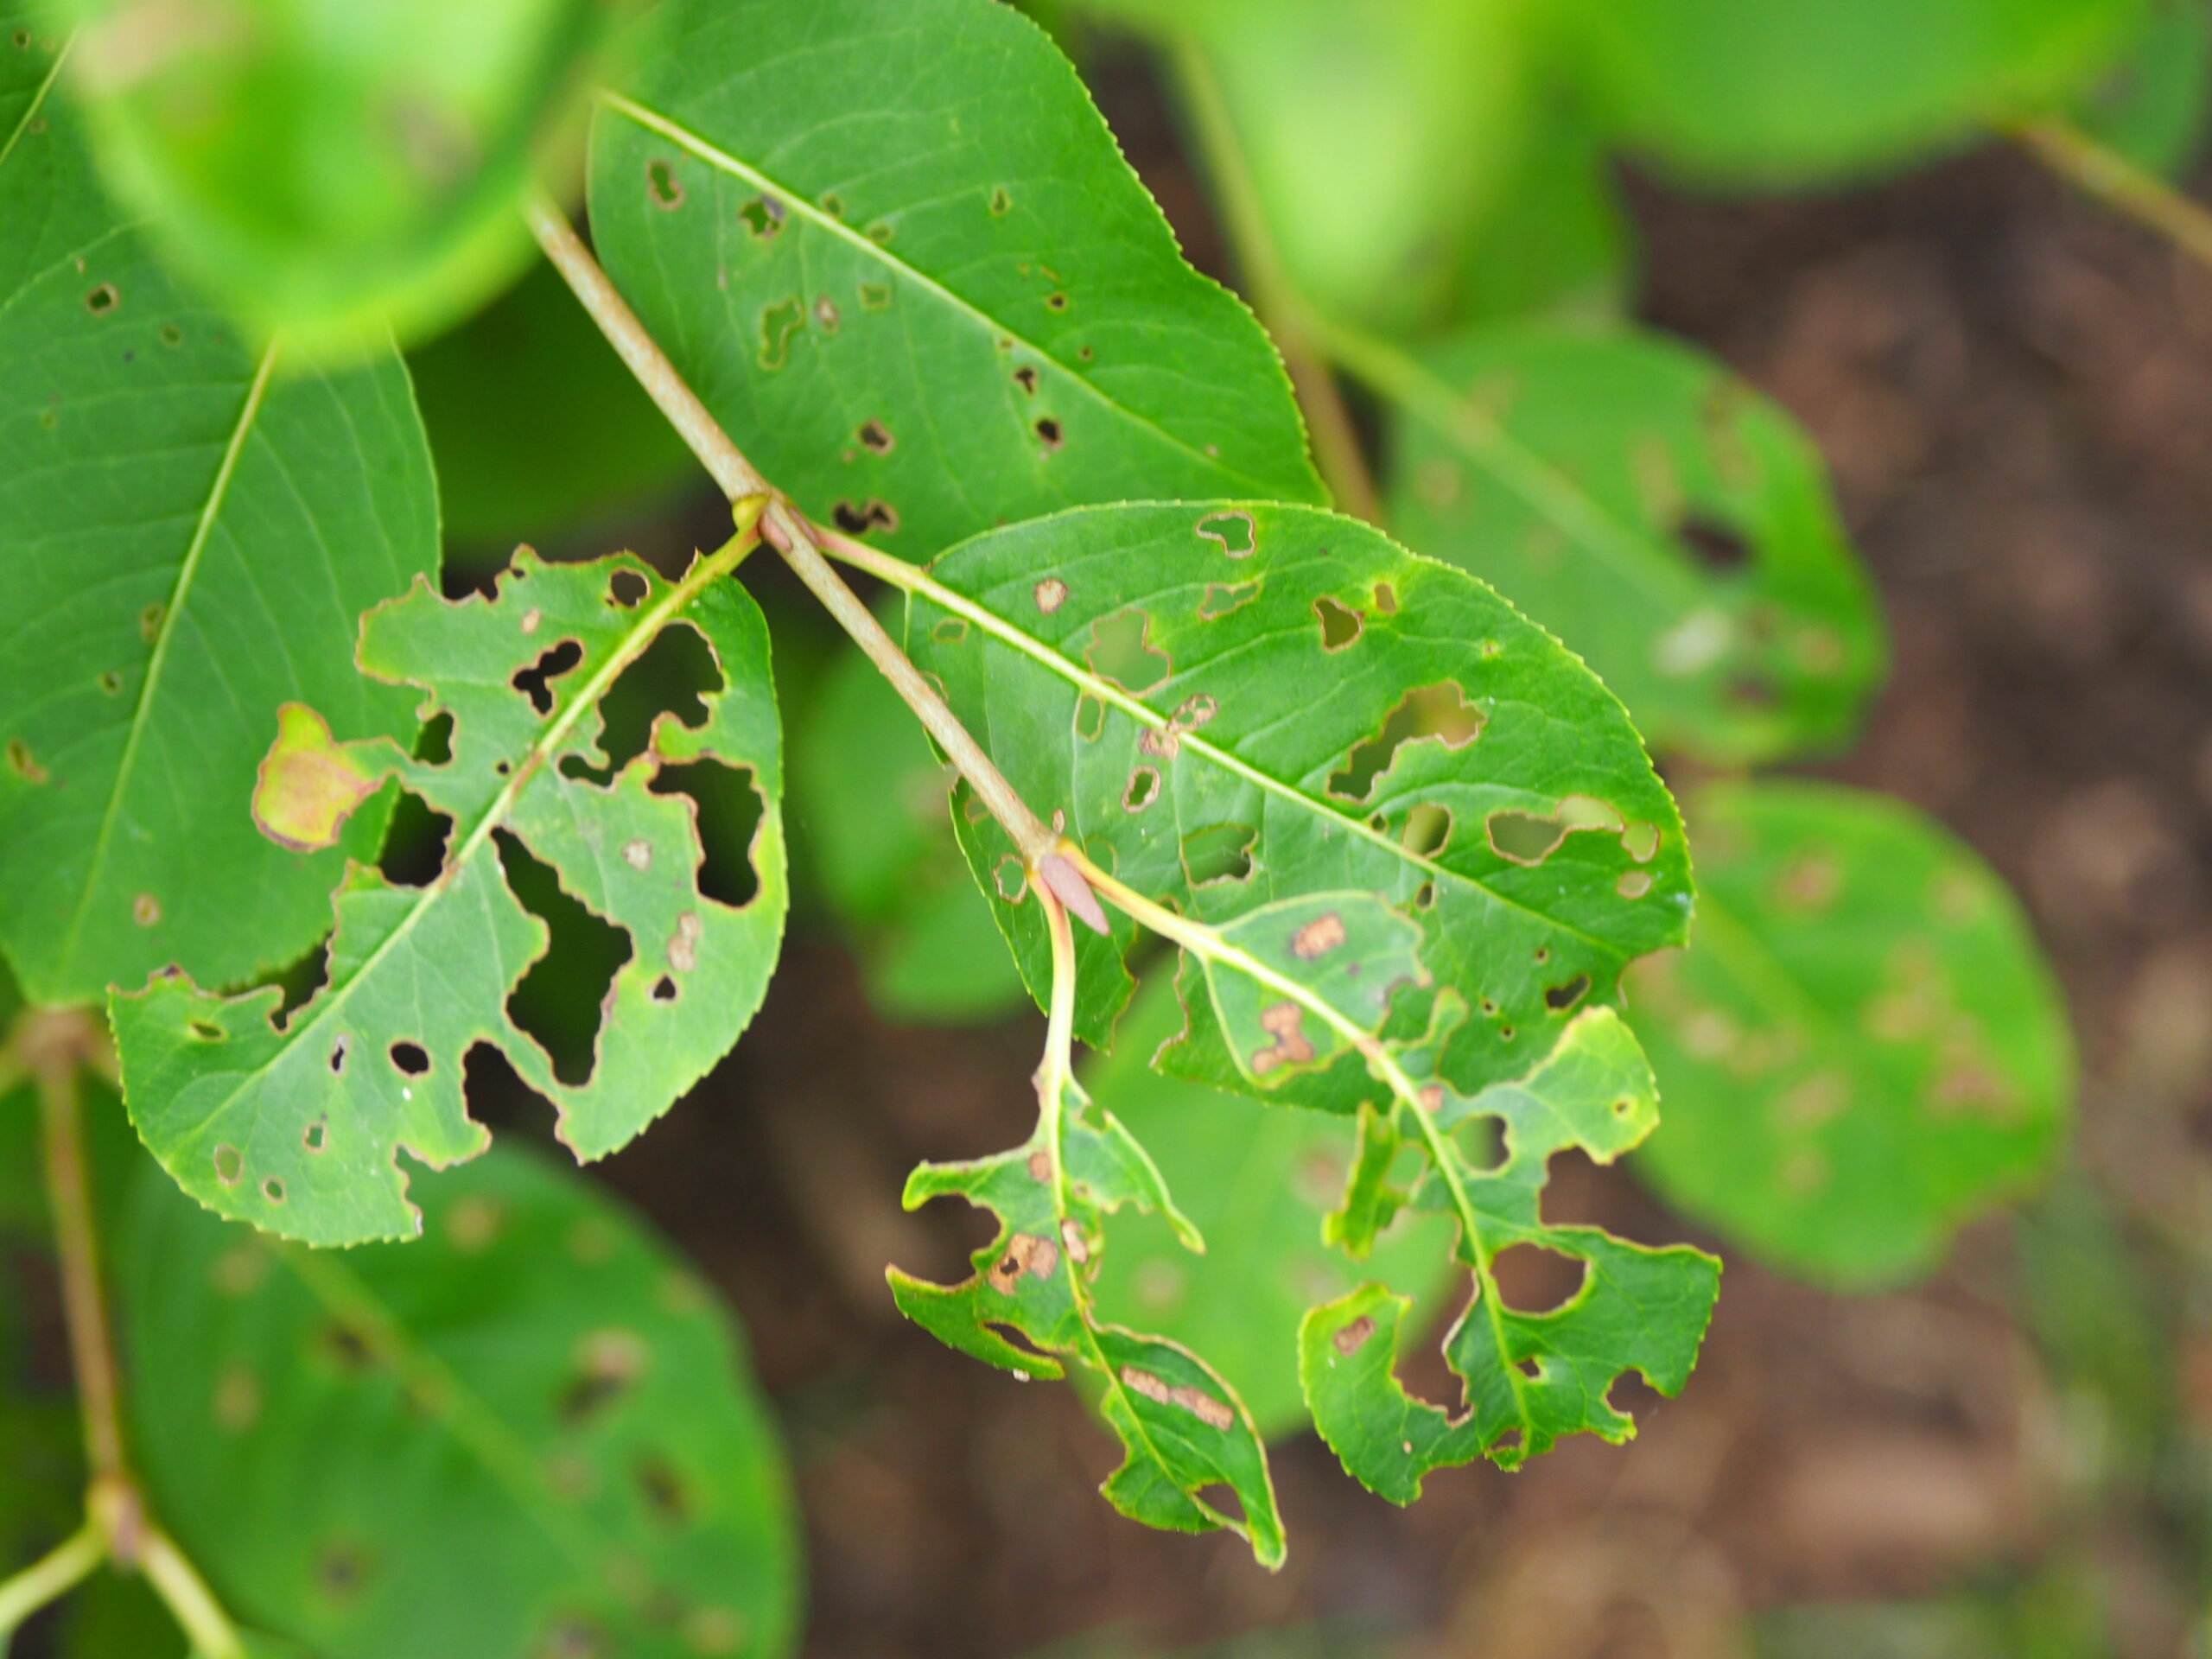 Foliar damage from the feeding of the Viburnum leaf beetle. Note that the feeding can be done inside the leaf as well as on the leaf margins.
ANDREW MESSINGER